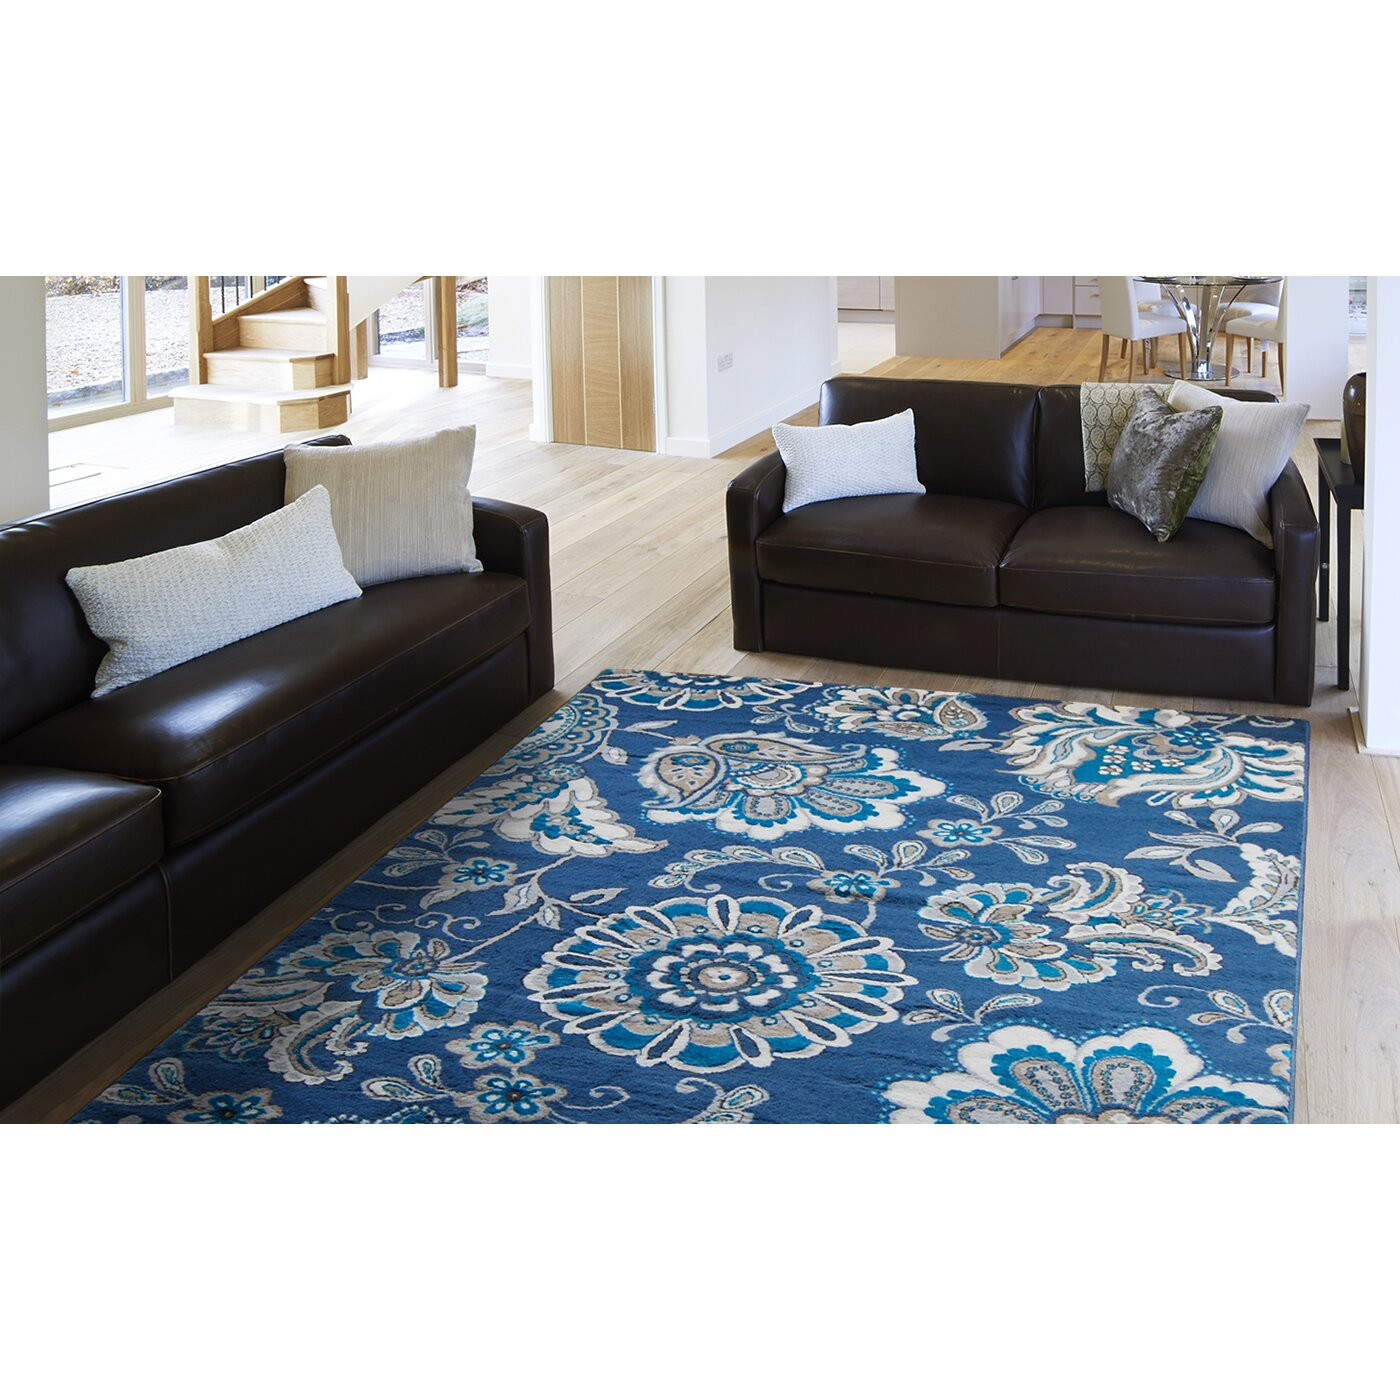 Wayfair Living Room Rugs
 Andover Mills Tremont Blue Area Rug & Reviews